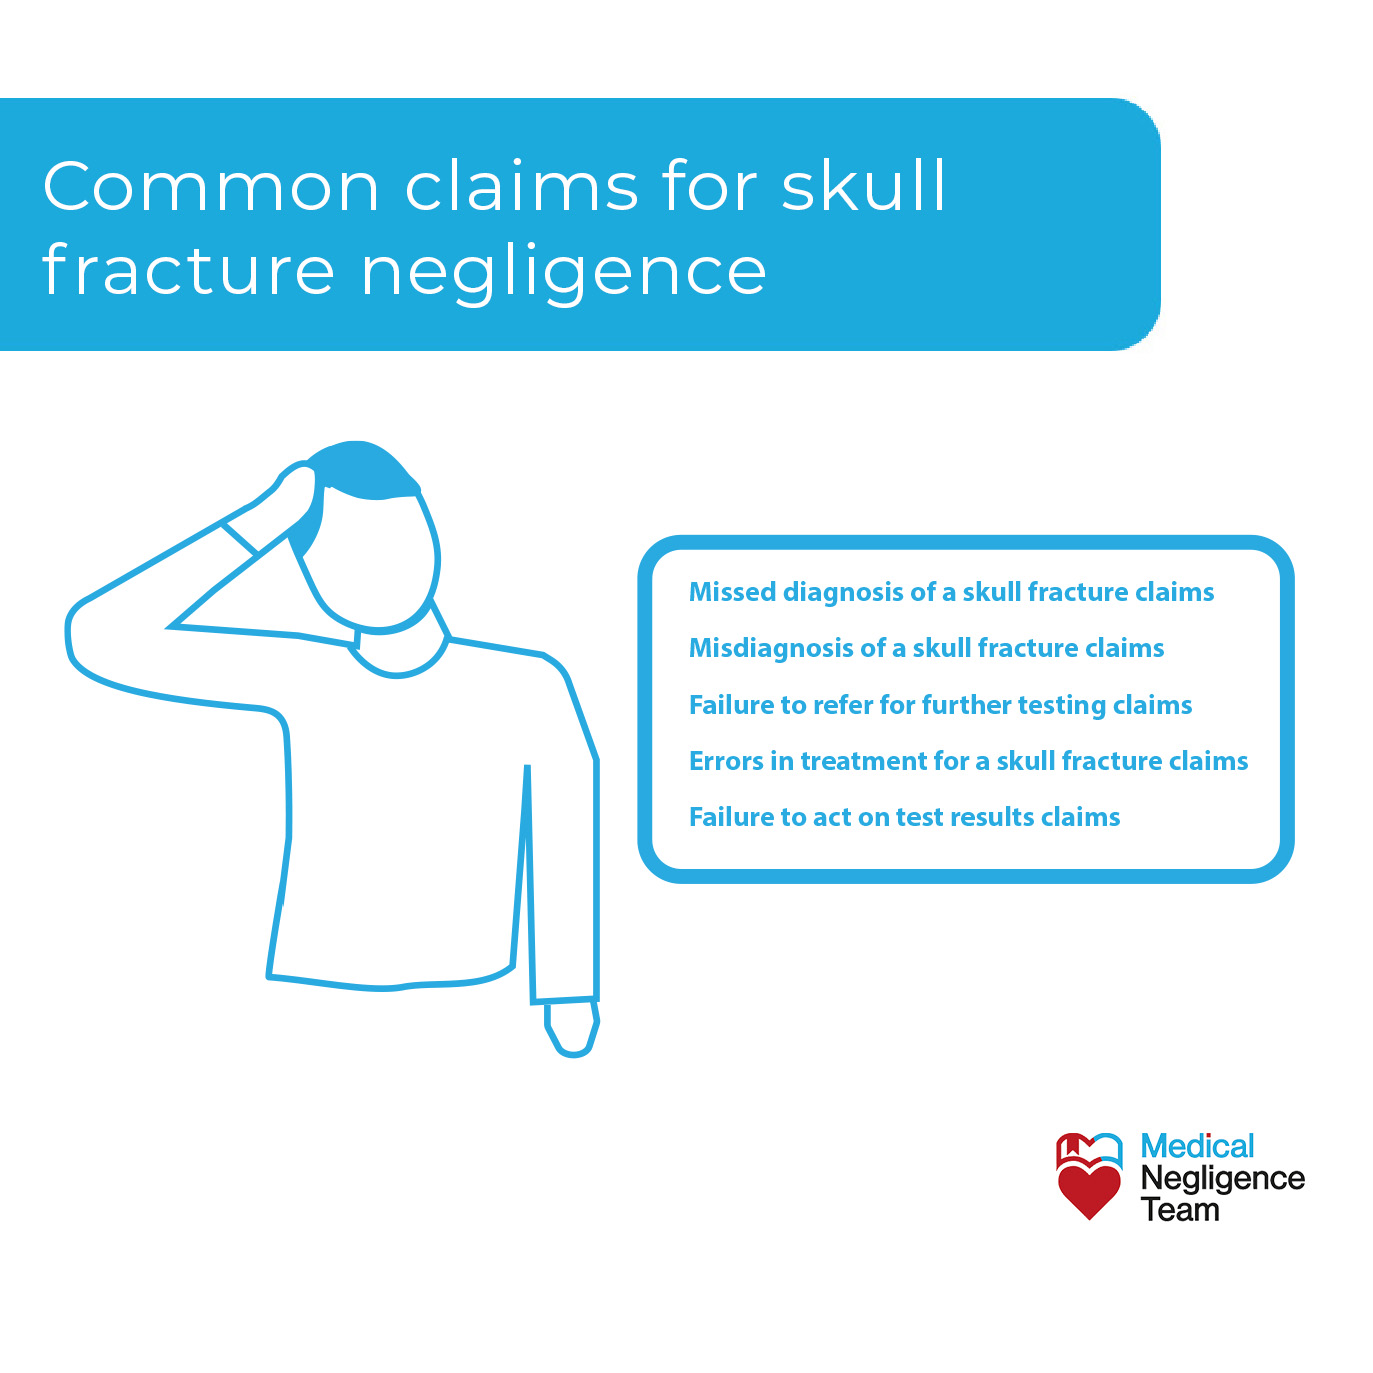 Common claims for skull fracture negligence